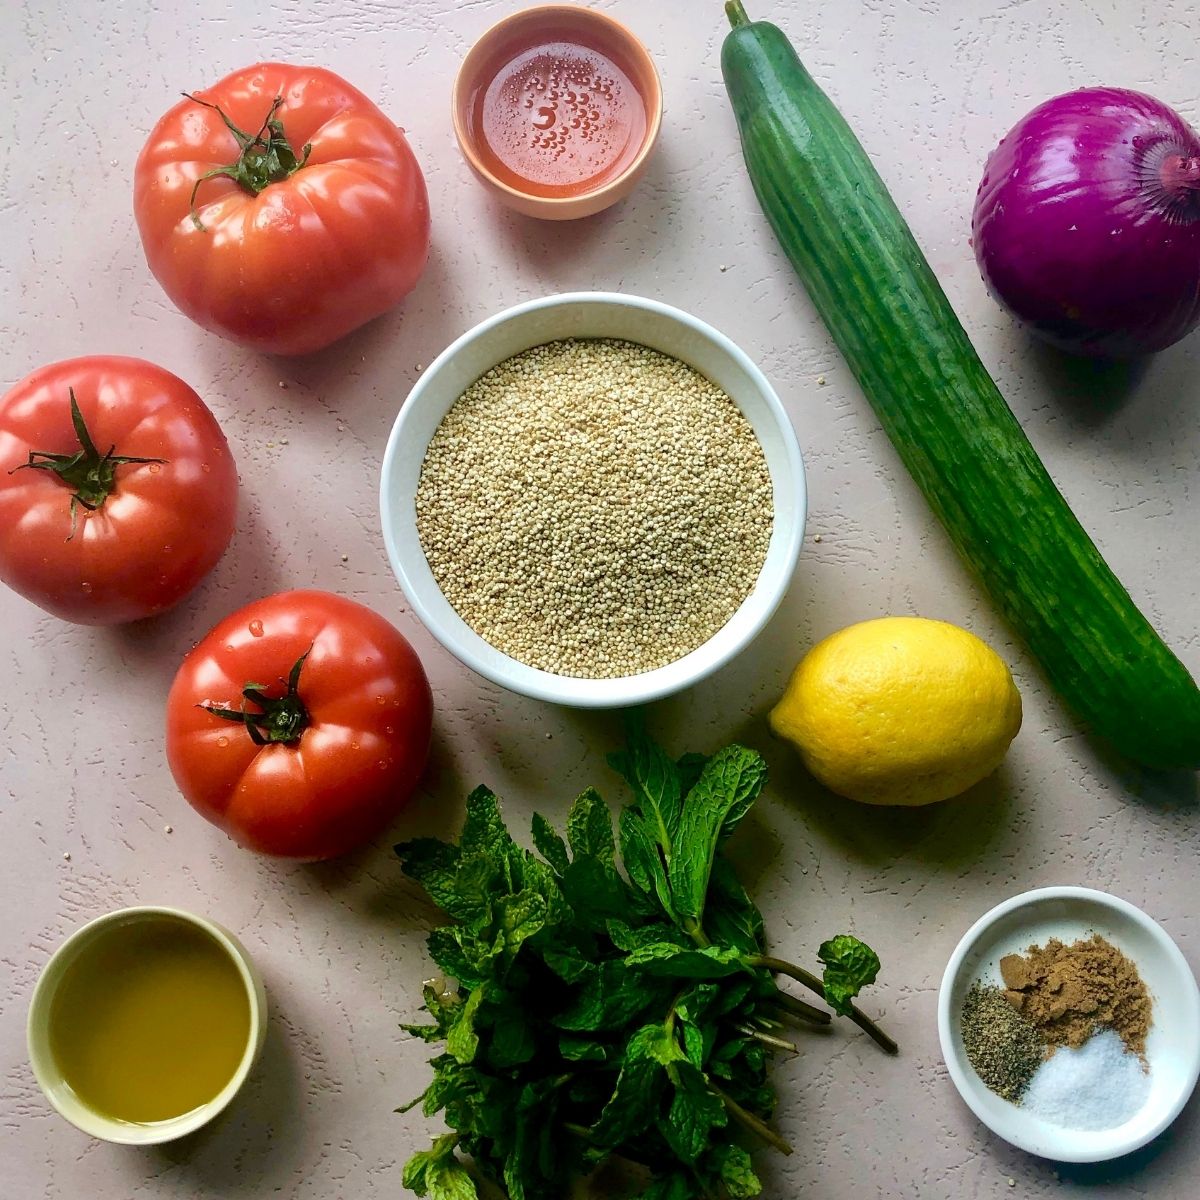 3 tomatoes, 1 cuke, 1 red onion, 1 lemon, handful of fresh mint leaves, bowl of quinoa, small bowls of olive oil, vinegar, and spices